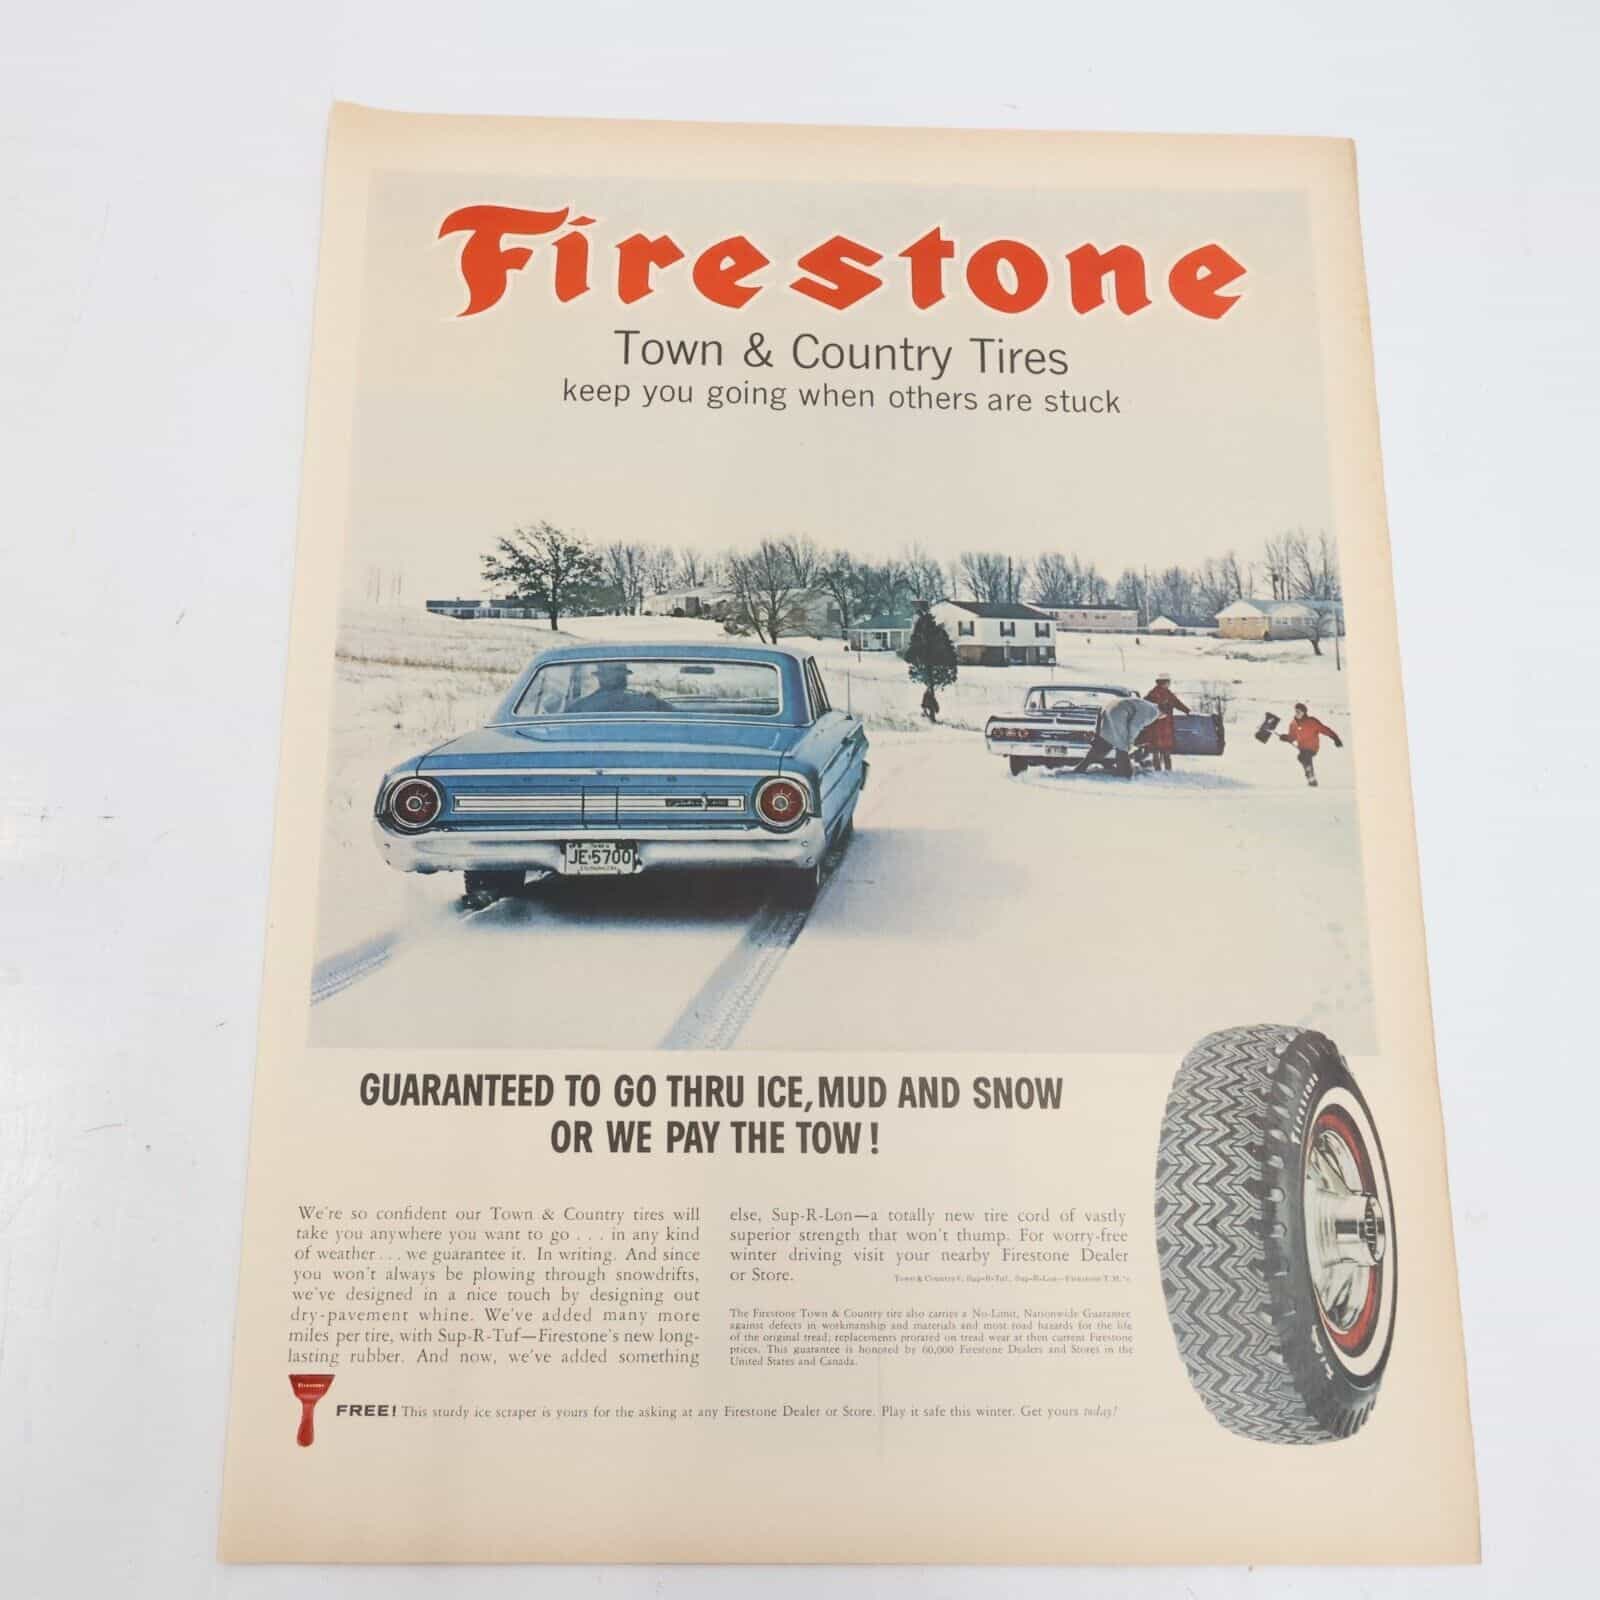 1964 Firestone Town & Country Tires Breck Shampoo Concentrate Print Ad 10.5×13.5